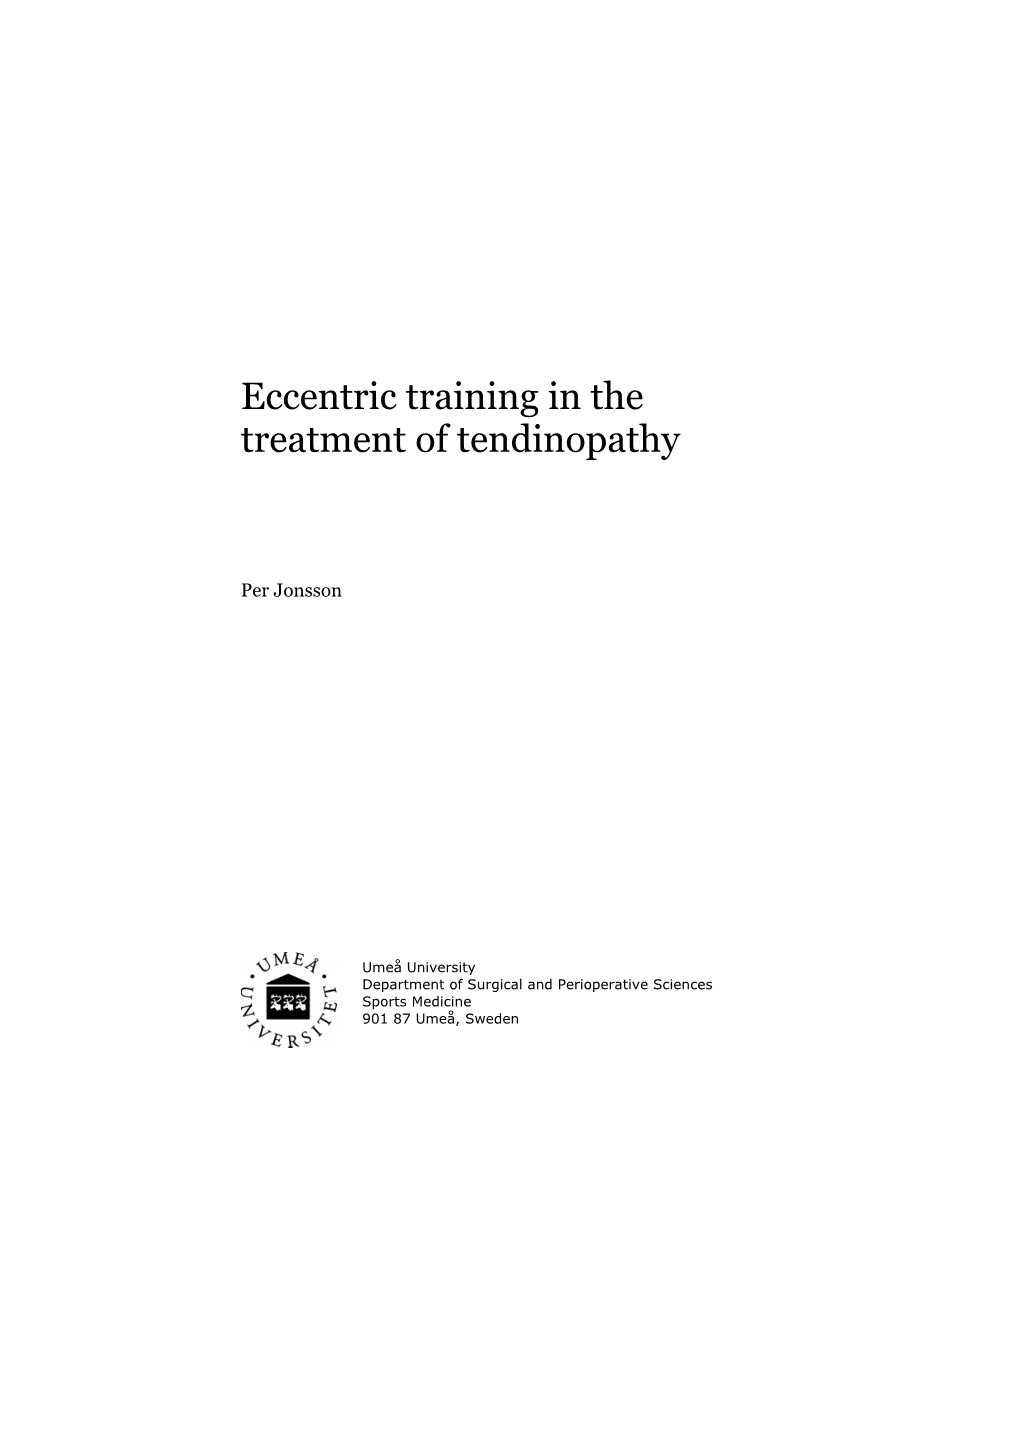 Eccentric Training in the Treatment of Tendinopathy